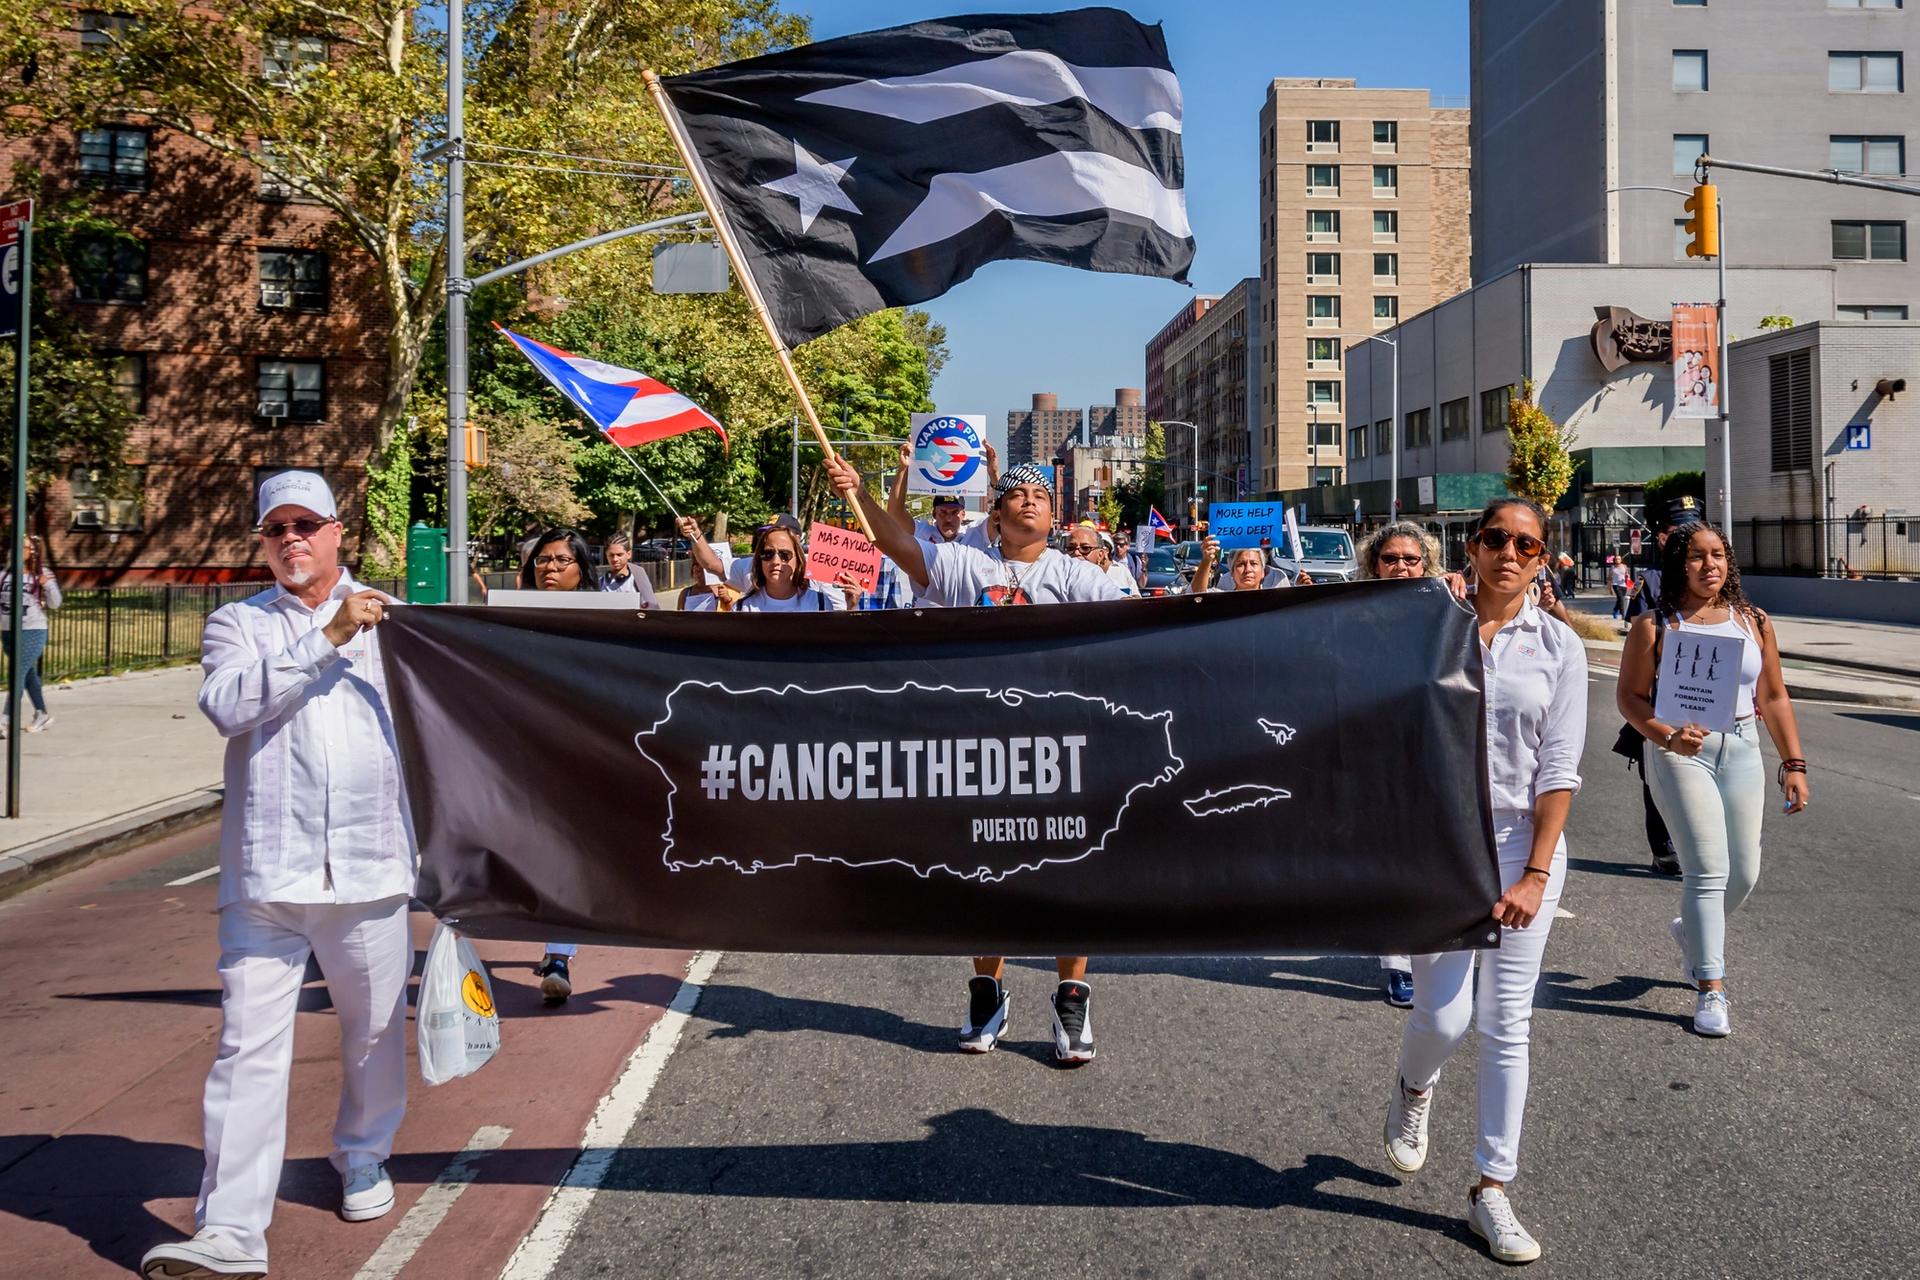 Hundreds of Puerto Ricans dressed in white participated on a silent procession carrying signs and banners through the streets of New York to focus the nation's attention on the island's struggles in the aftermath of Hurricane Maria Photo by Erik McGregor/LightRocket via Getty Images